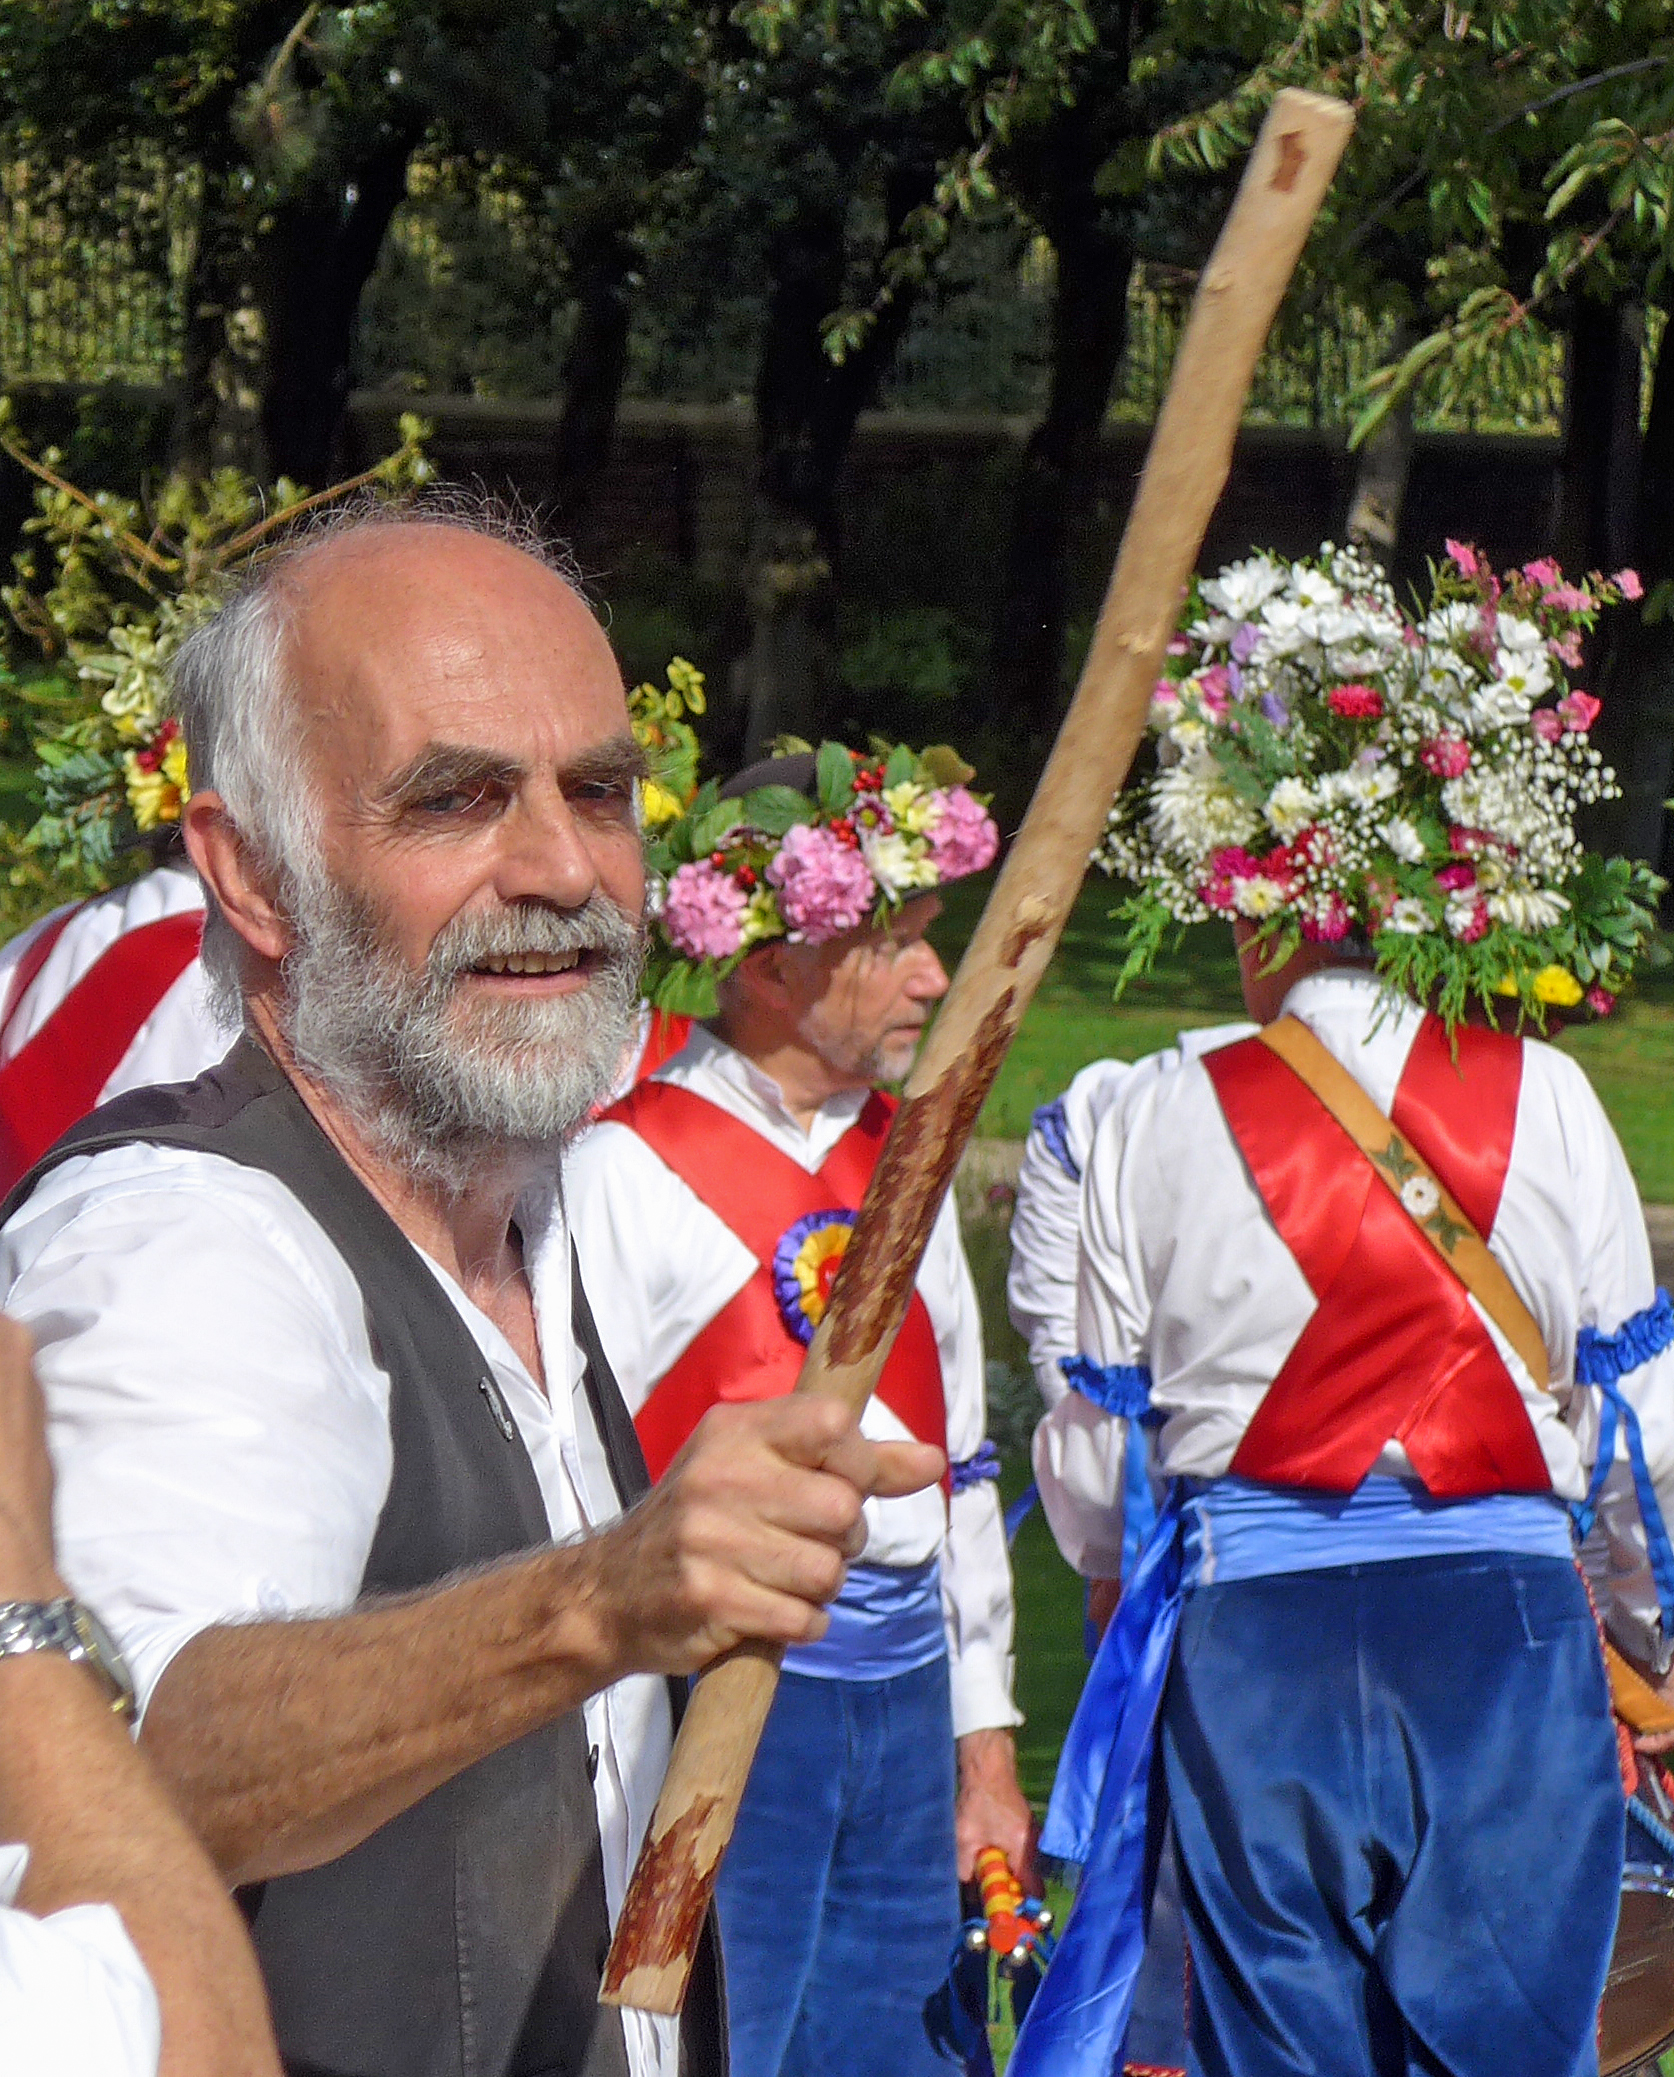 a group of men dressed in medieval clothing carrying flags